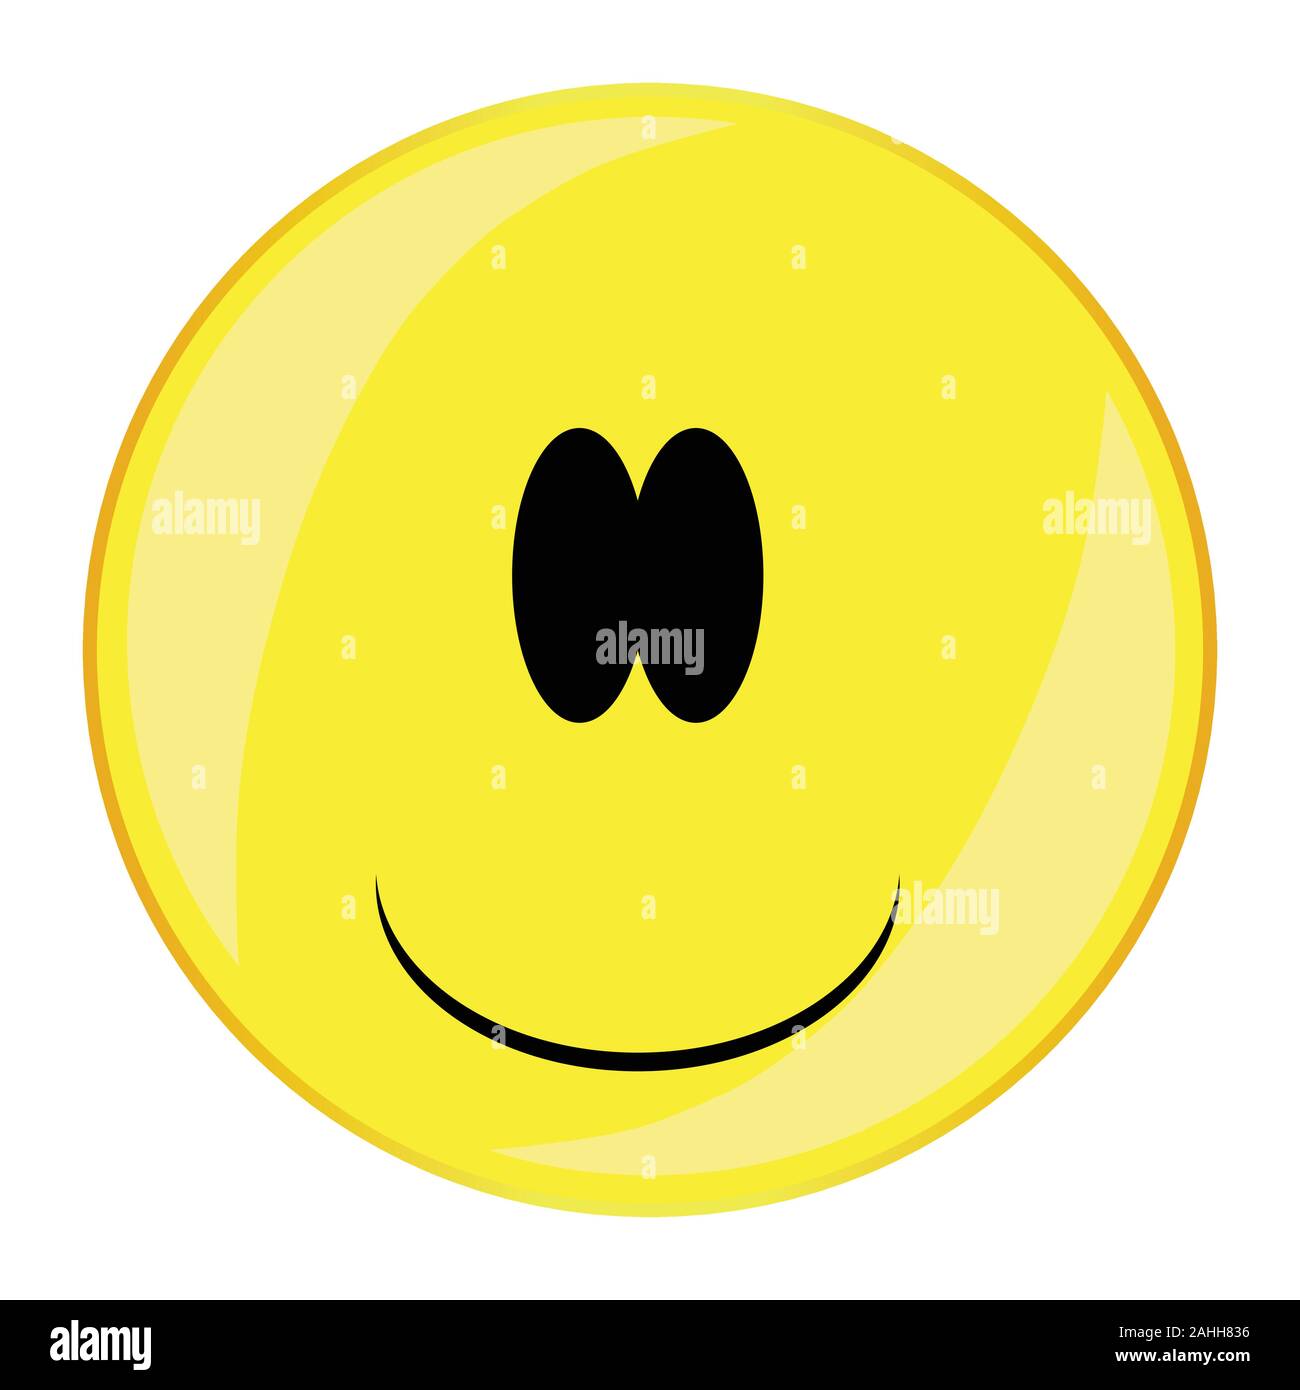 A silly stupid happy smile face button isolated on a white background Stock Vector